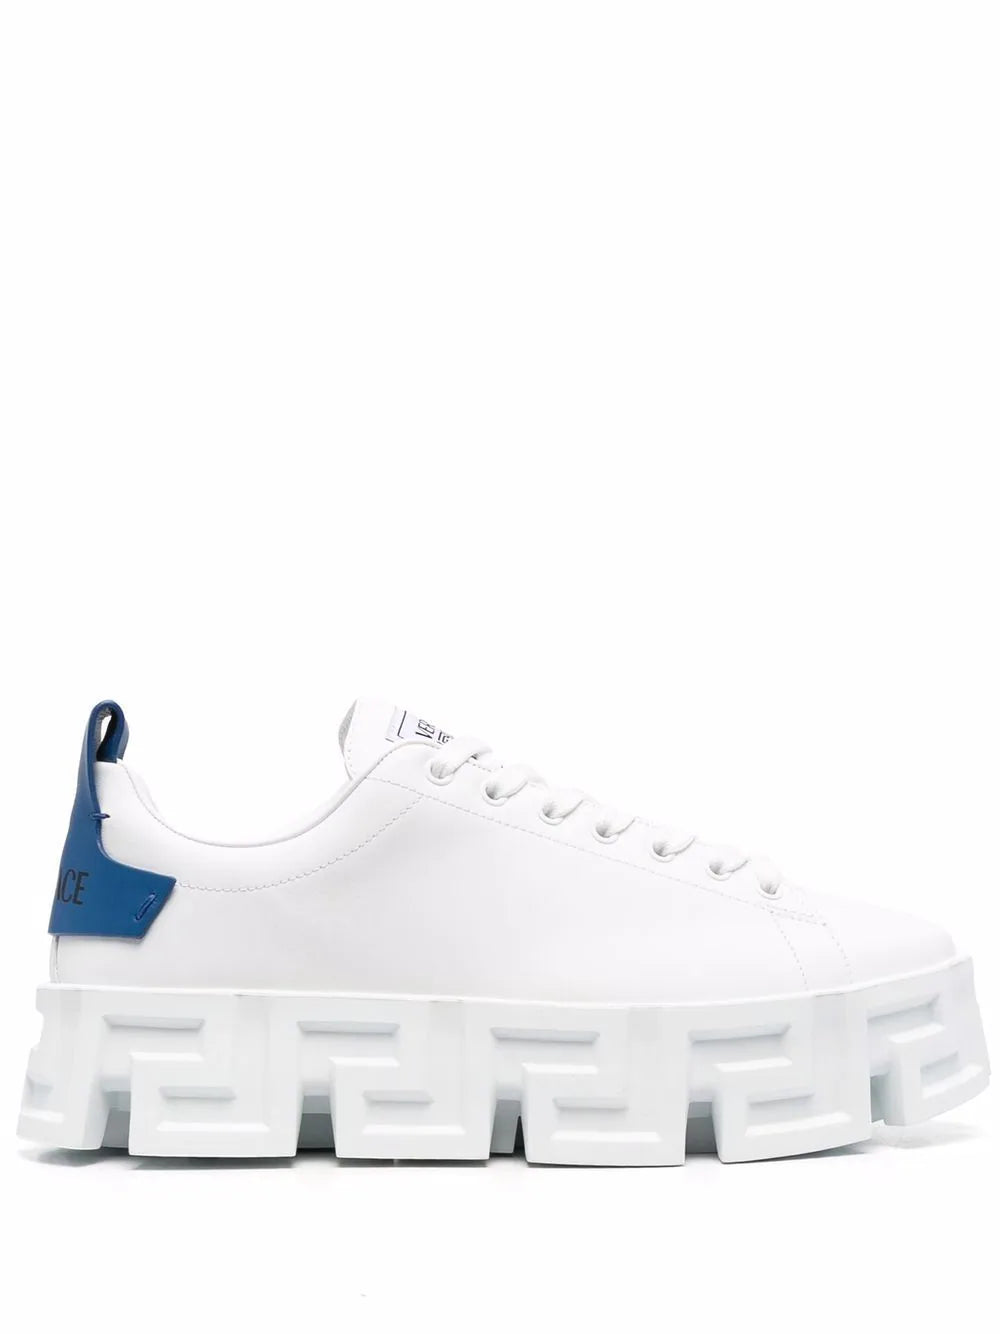 Versace Greca Labyrinth Low-Top Sneakers White / Blue